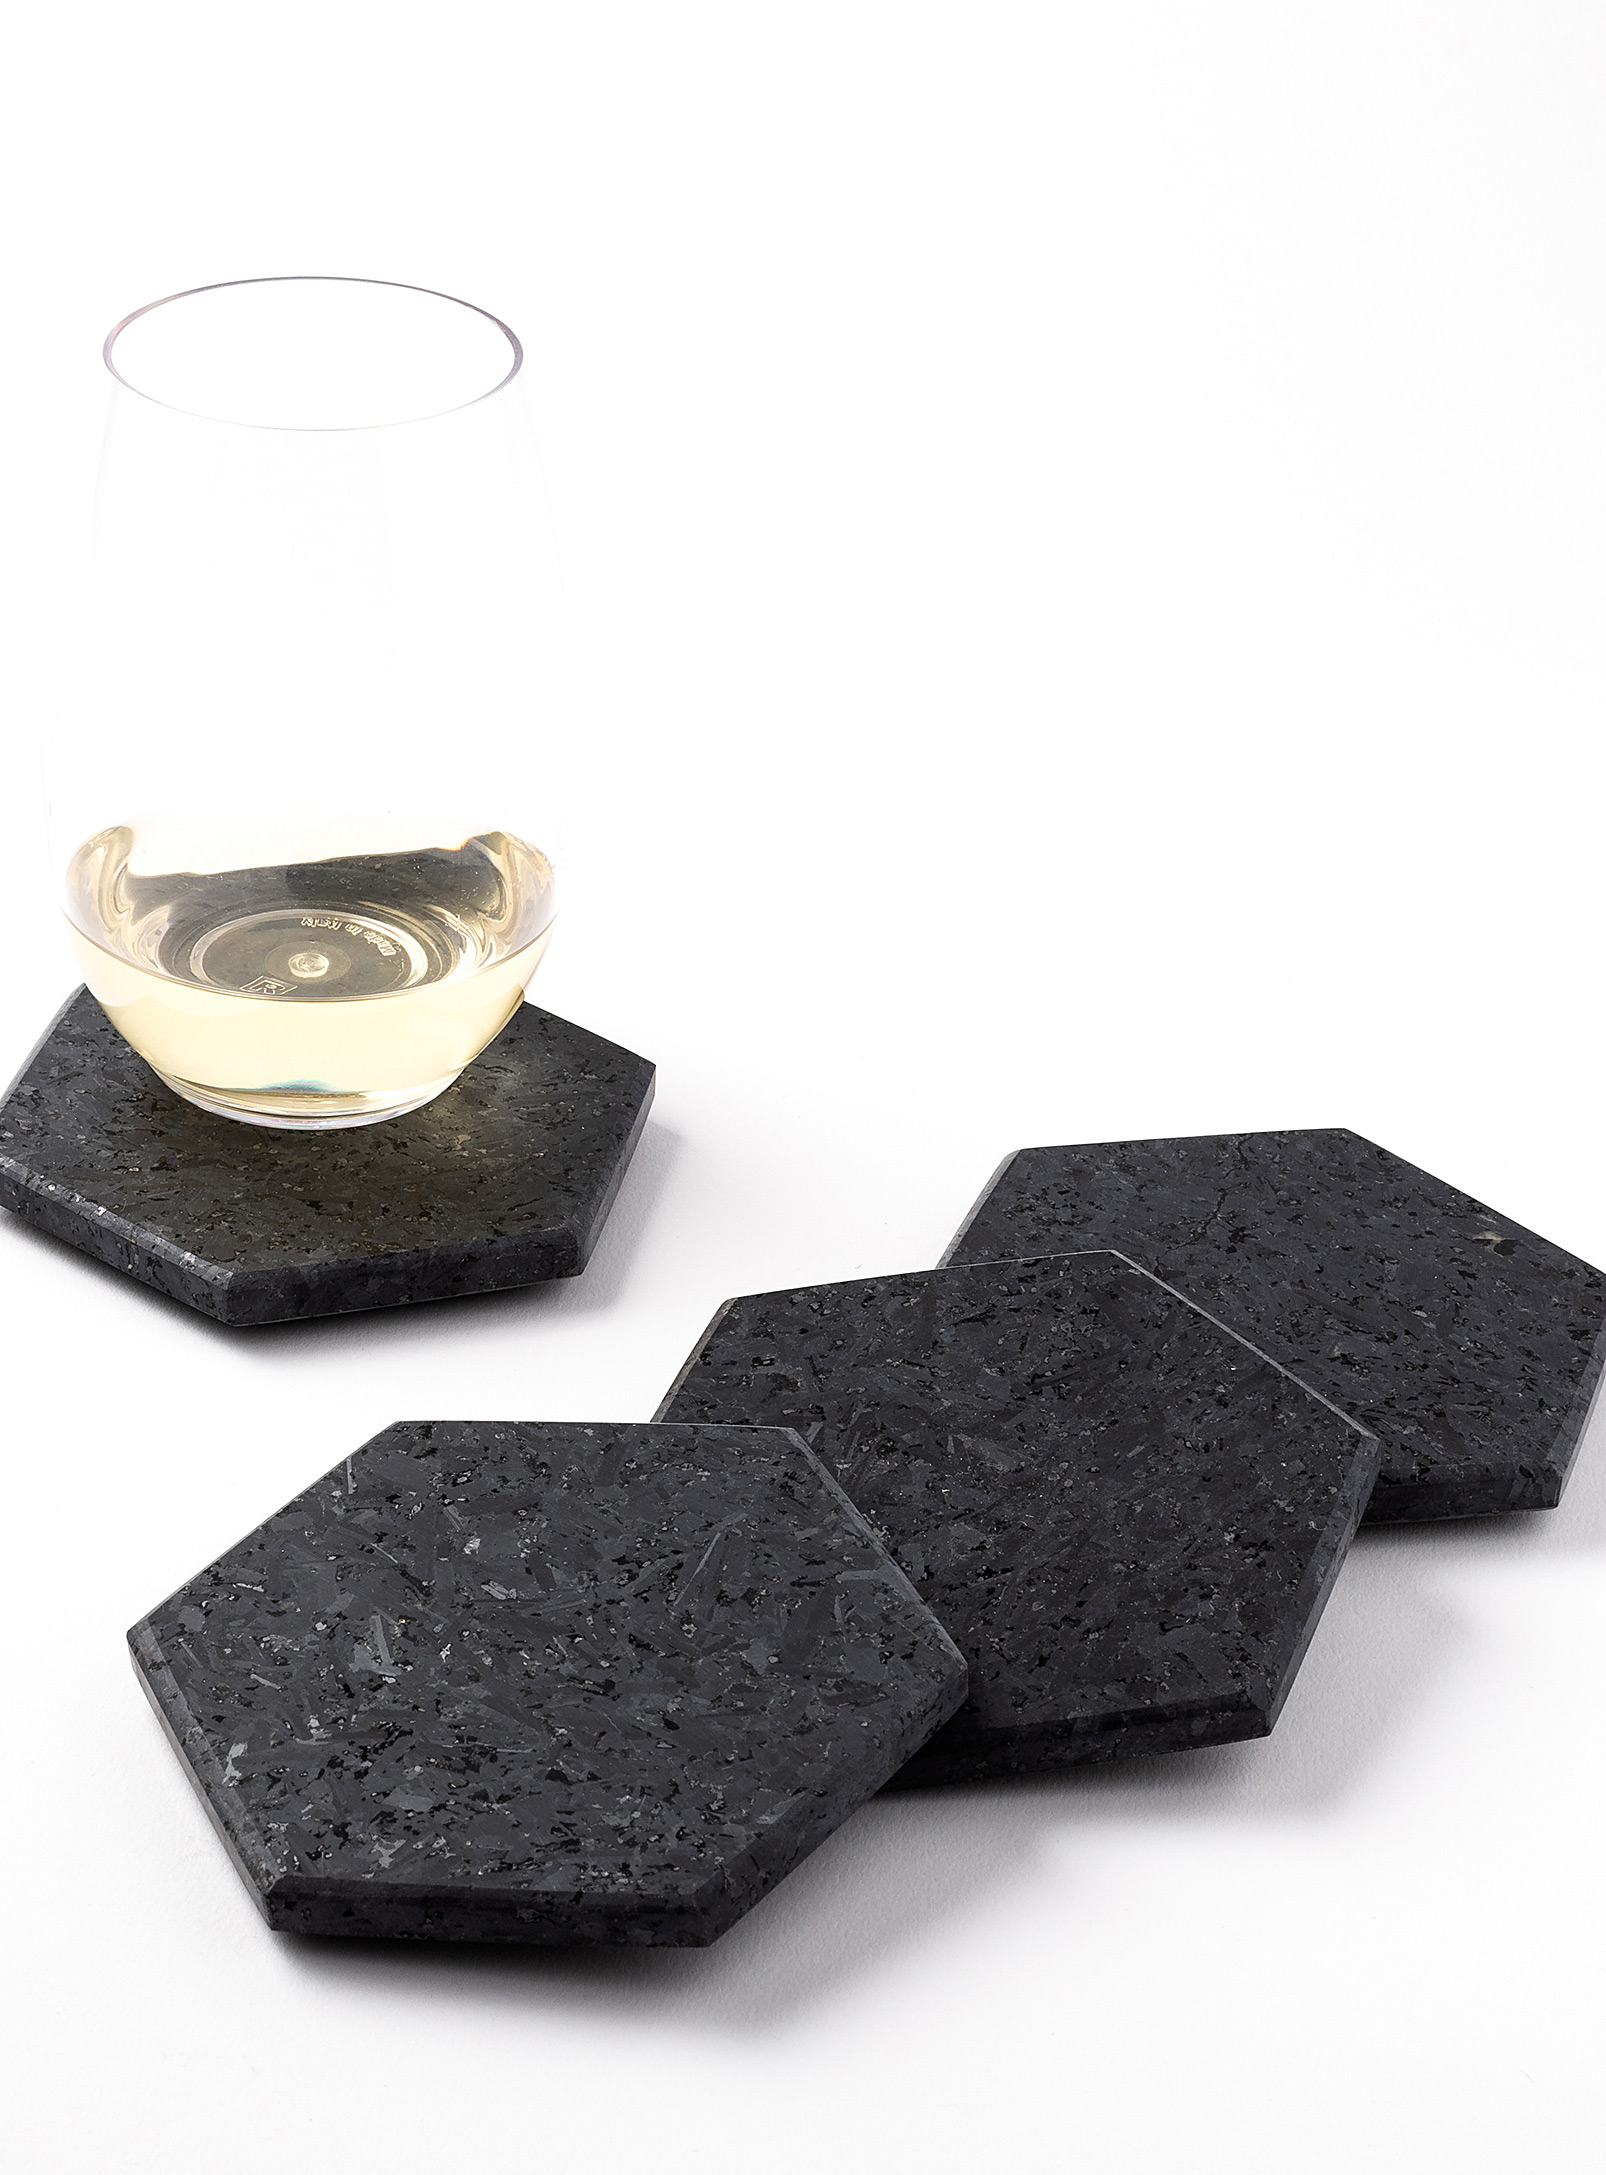 Atelier Bussière Hexagon Stone Coasters Set Of 4 In Black